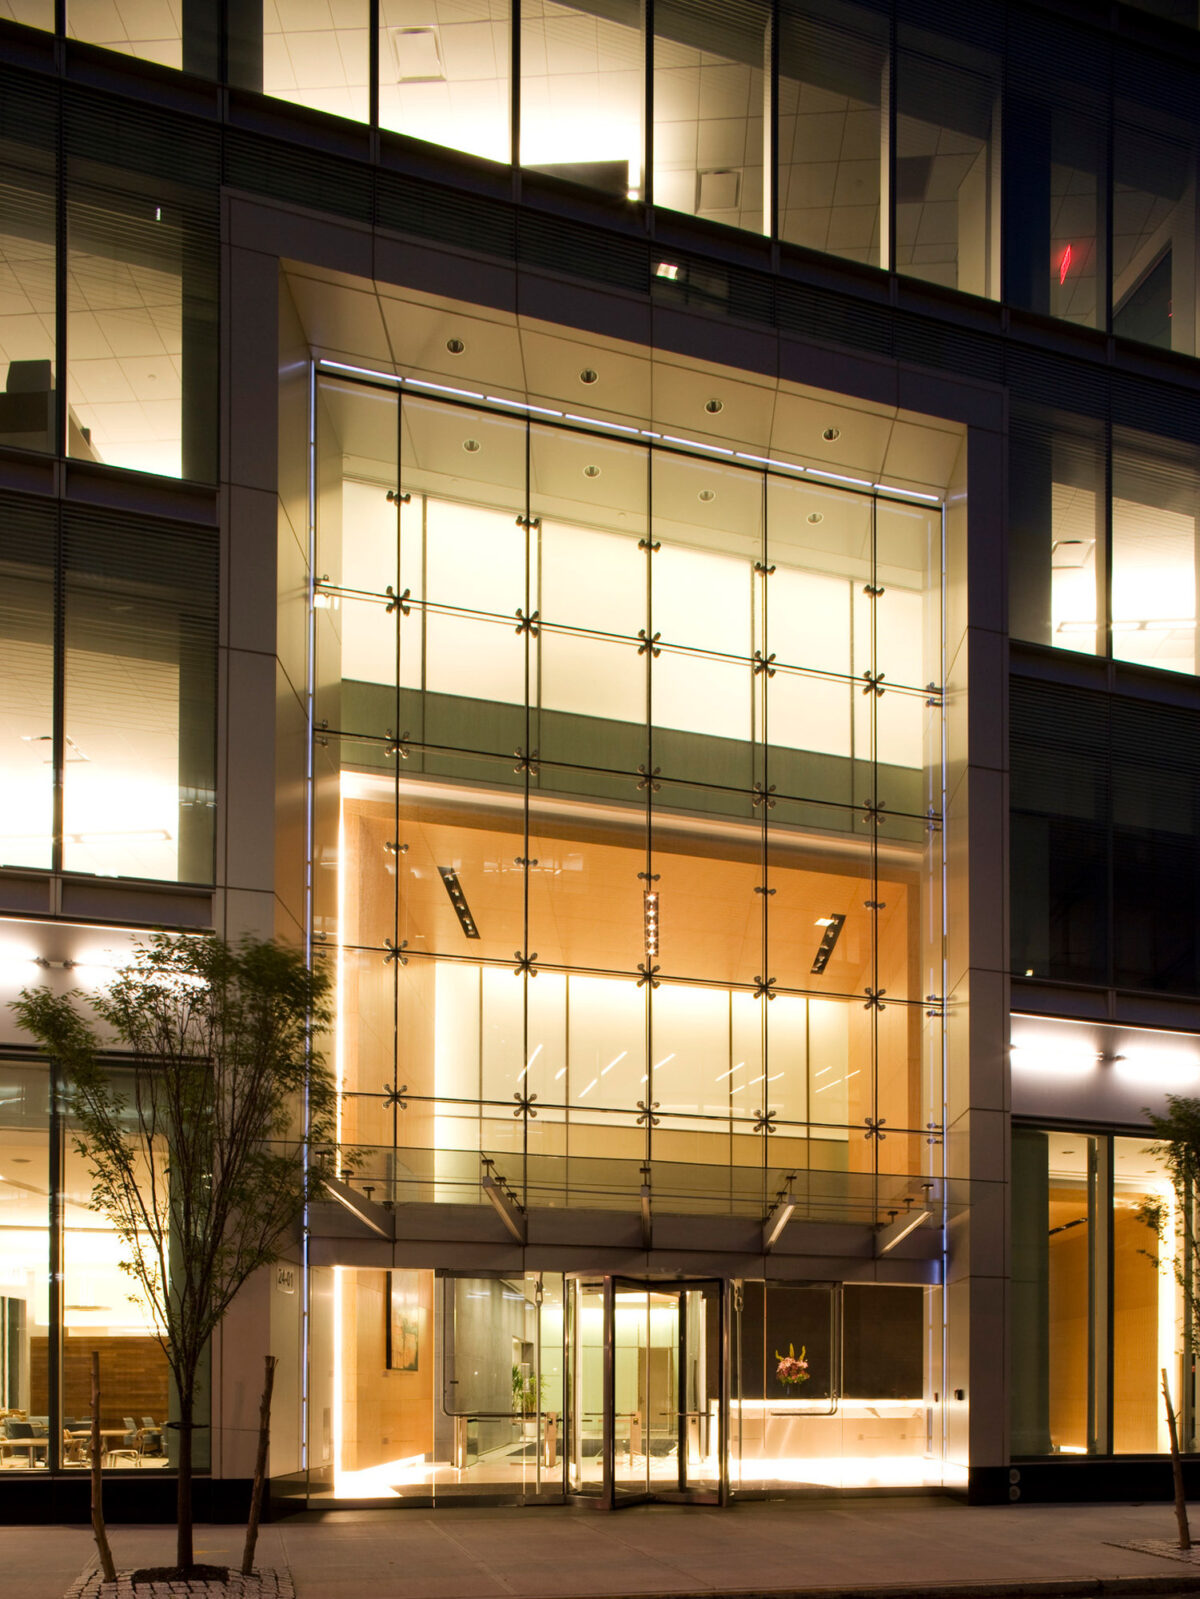 Modern office building entrance featuring a tall glass facade with a grid of metallic mullions, illuminated by warm interior lighting against the evening sky, showcasing transparency and contemporary design aesthetics.